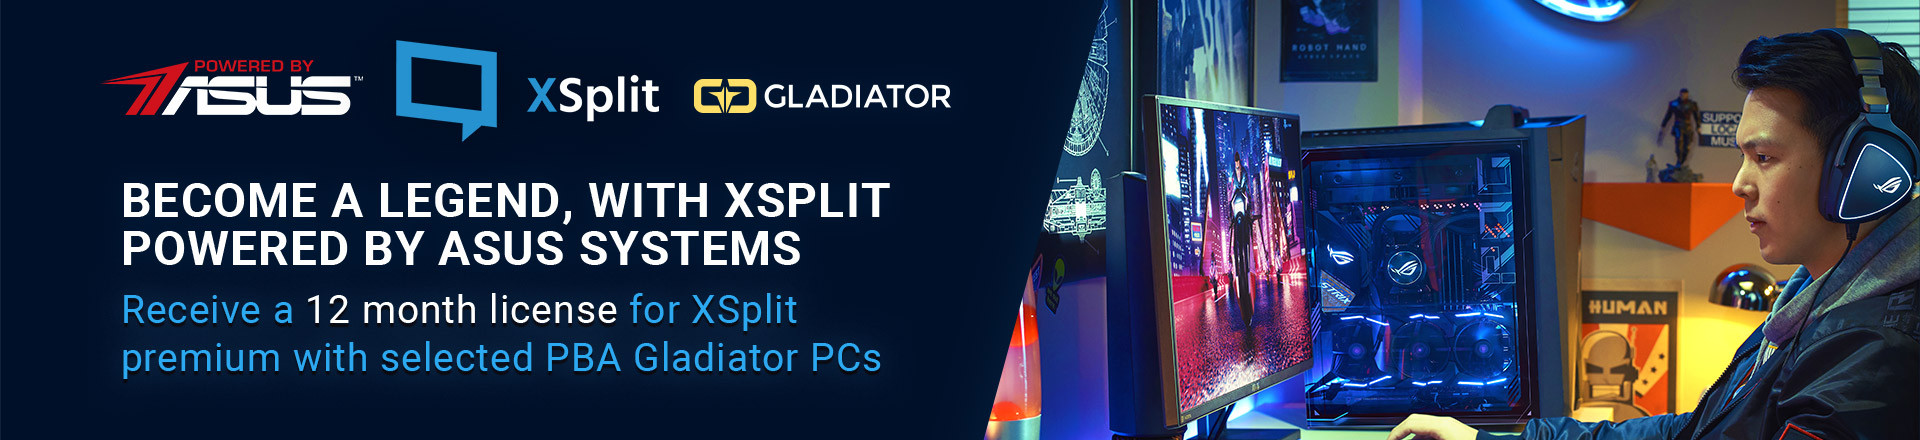 Receive a 12 month license for XSplit premium with selected PBA Gladiator PCs